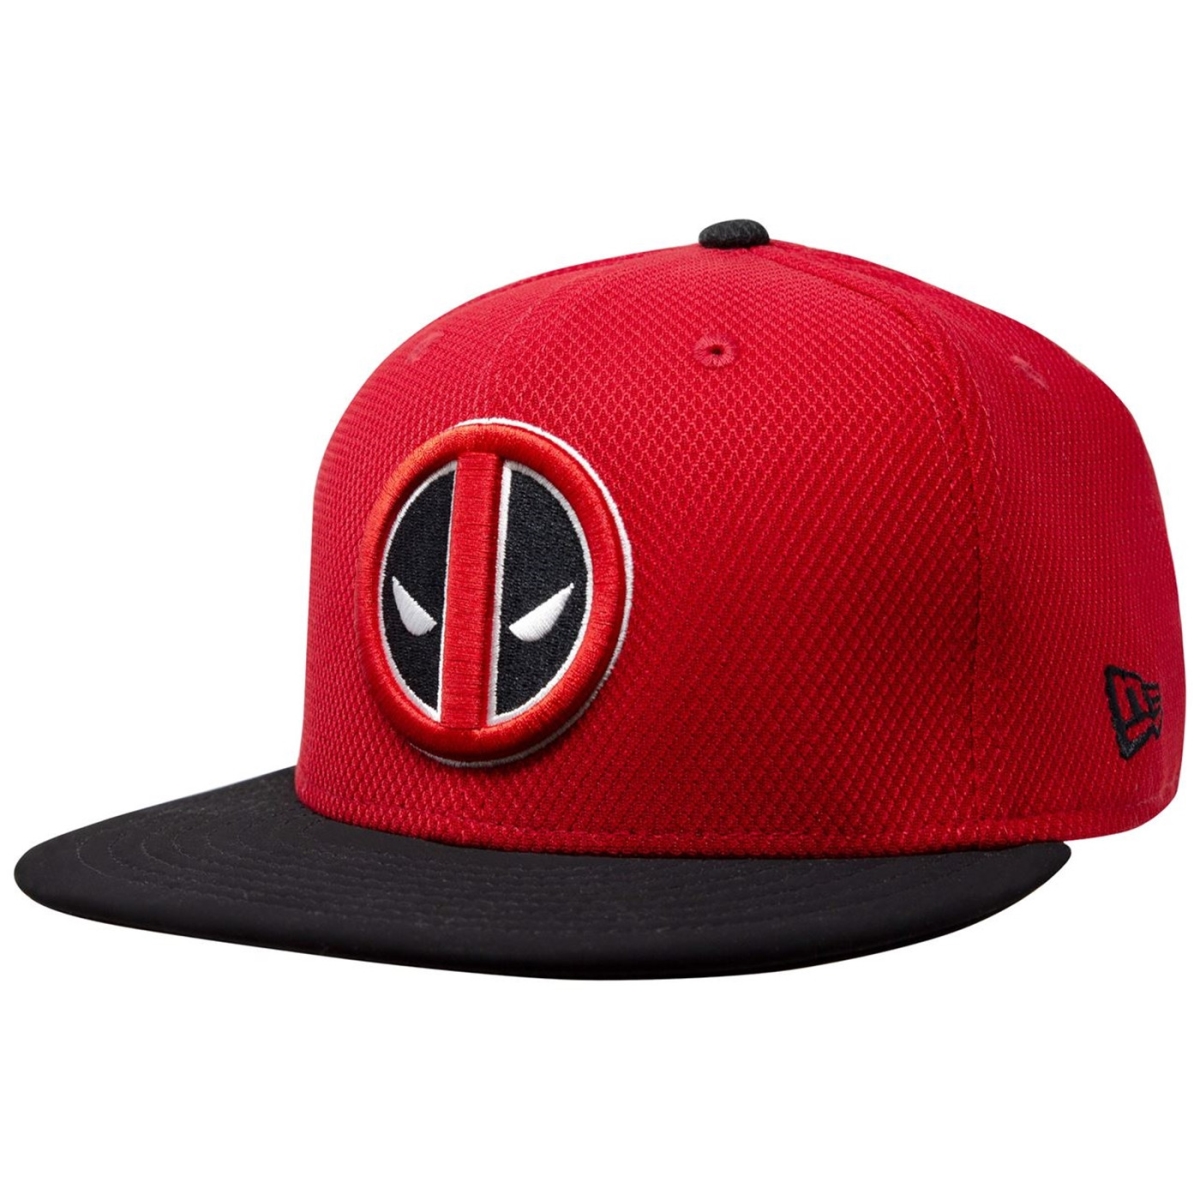 Picture of Deadpool hatdpsymrb5950-758-7 5-8 Fitted Deadpool Symbol Red & Black 59Fifty Fitted Hat - Size 7.625